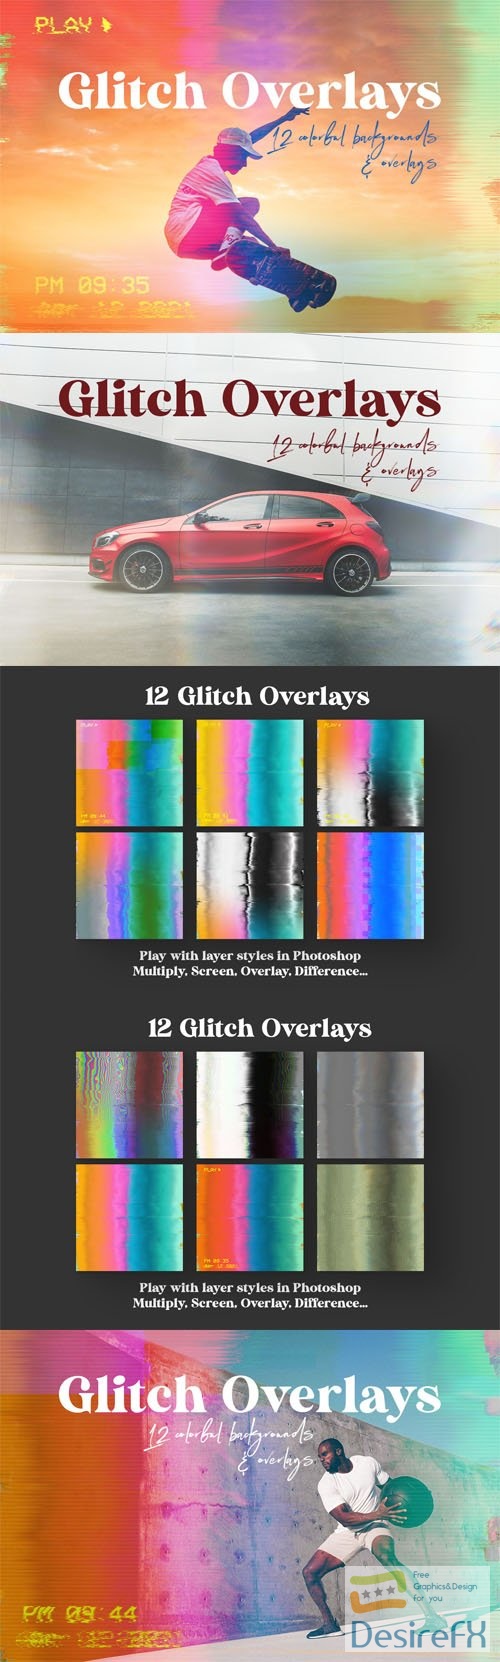 Glitch Overlays - 12 Colorful Backgrounds & Overlays